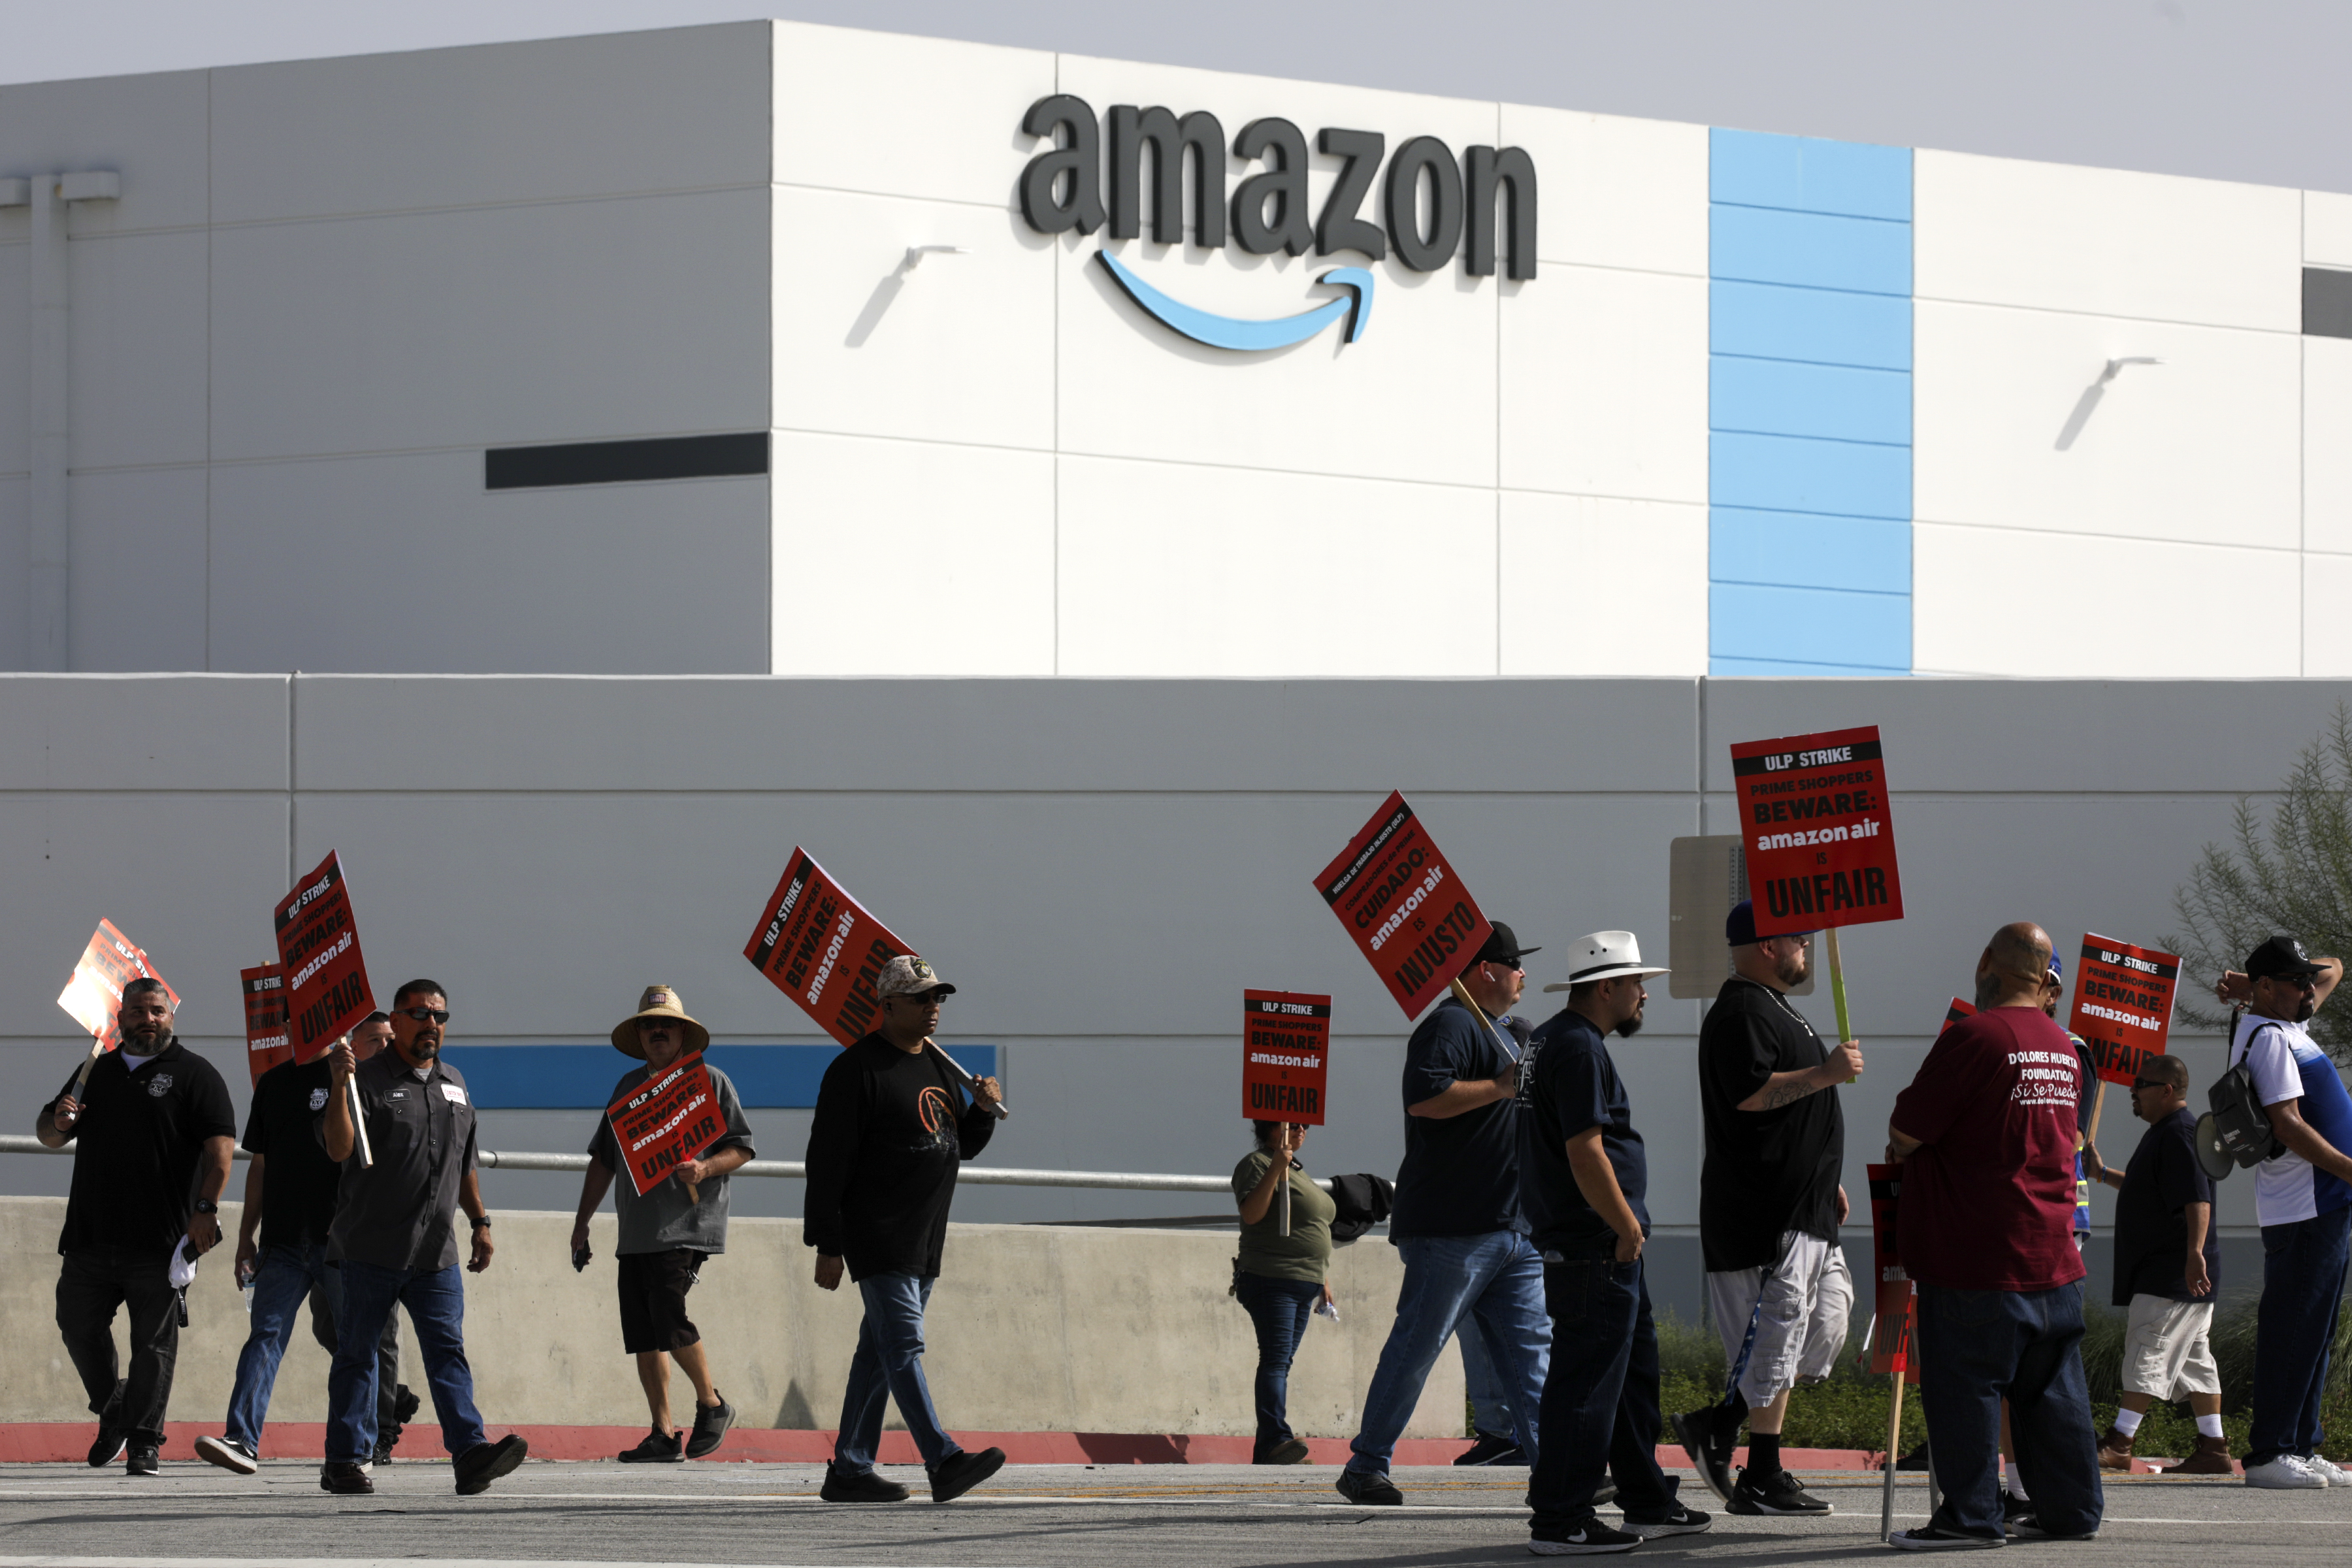 Amazon warehouse workers carrying protest signs outside a building bearing the Amazon logo.